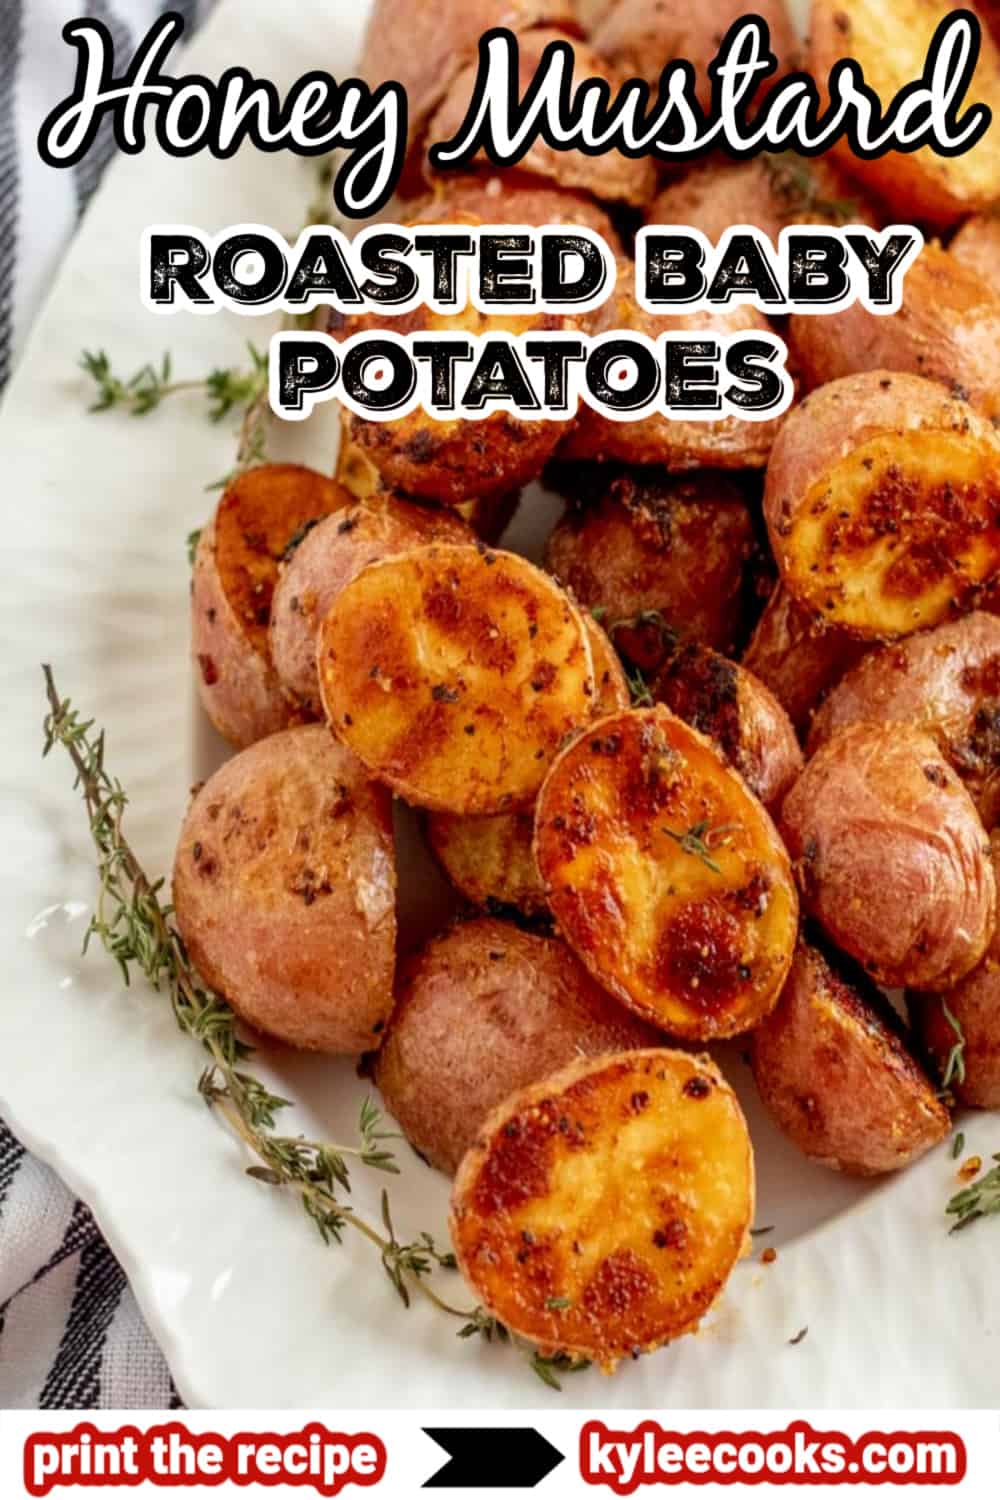 roasted baby potatoes with text overlaid